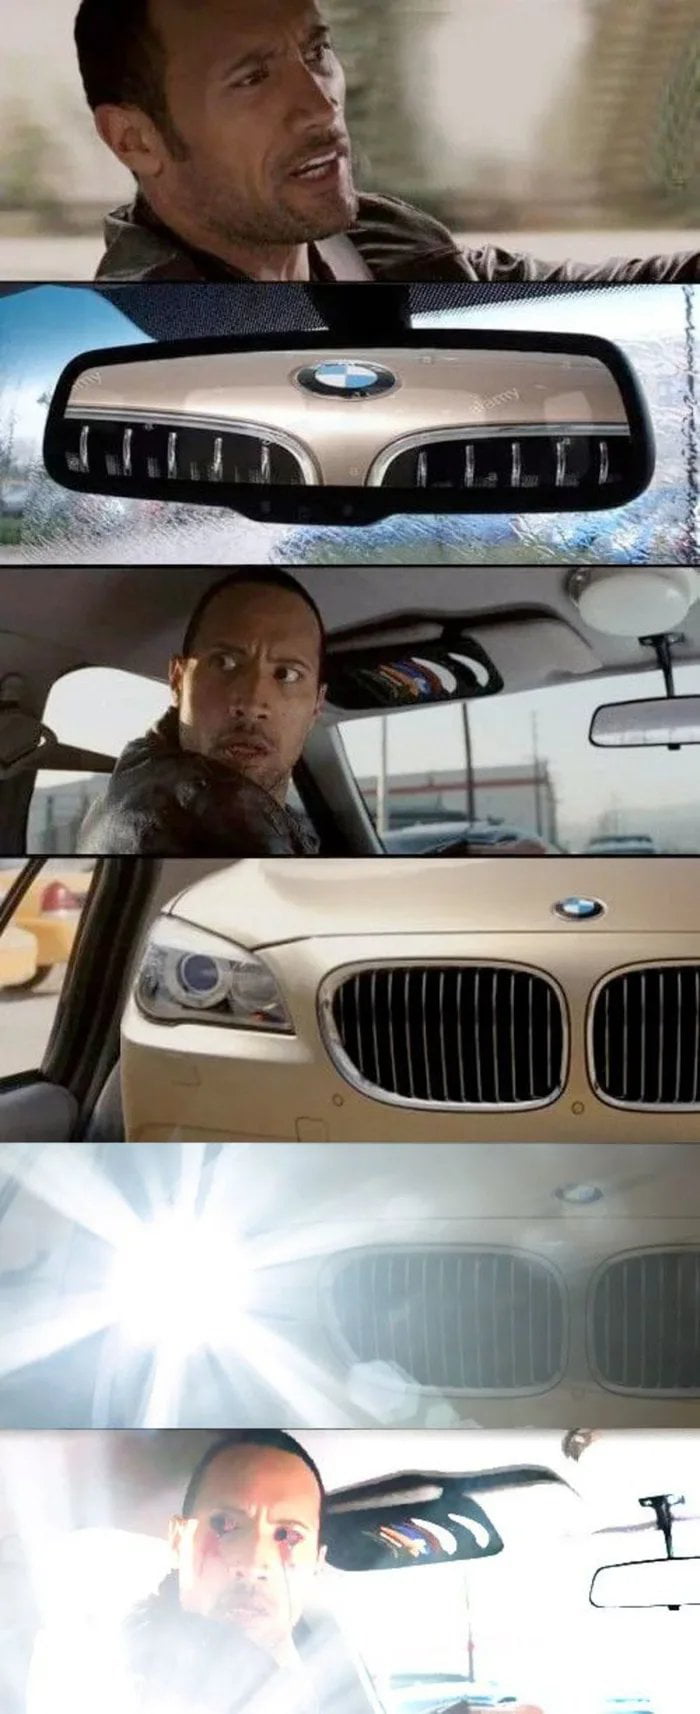 Me driving when suddenly a BMW